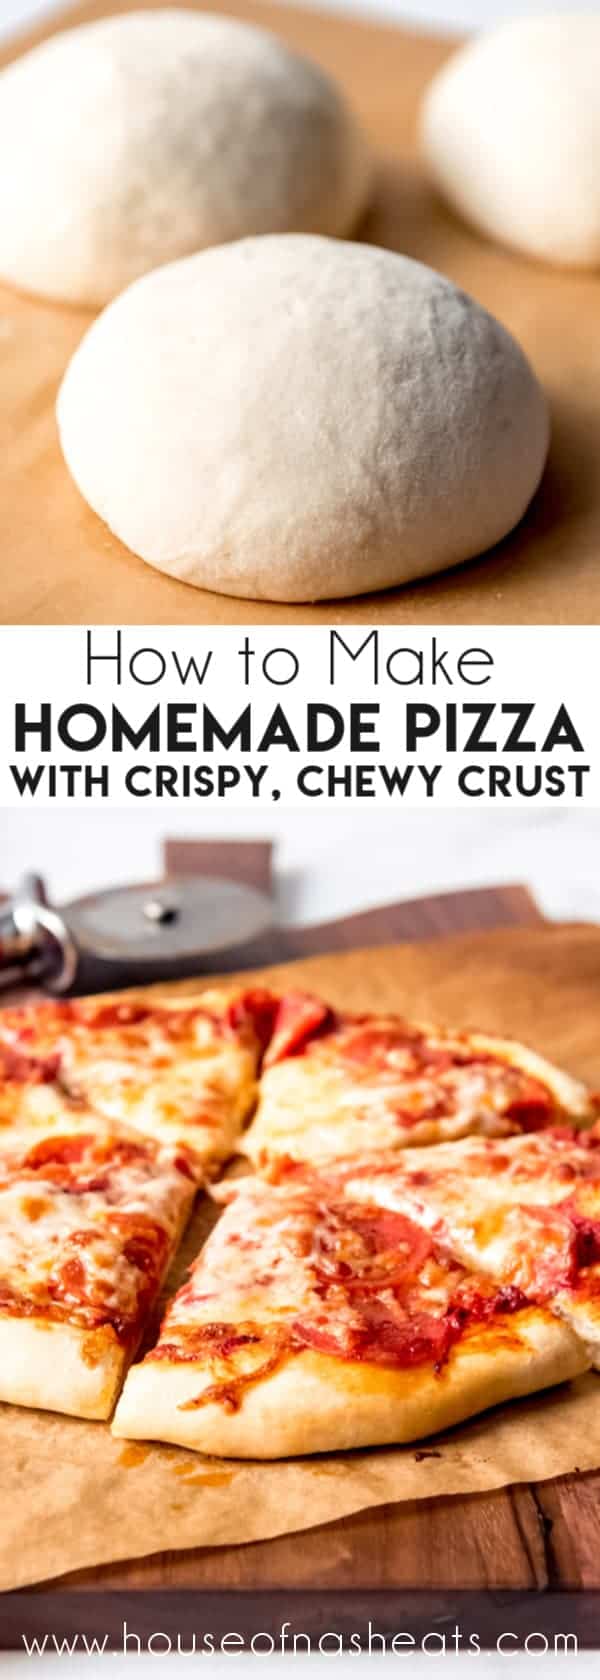 Best Homemade Pizza - How to Make Homemade Pizza